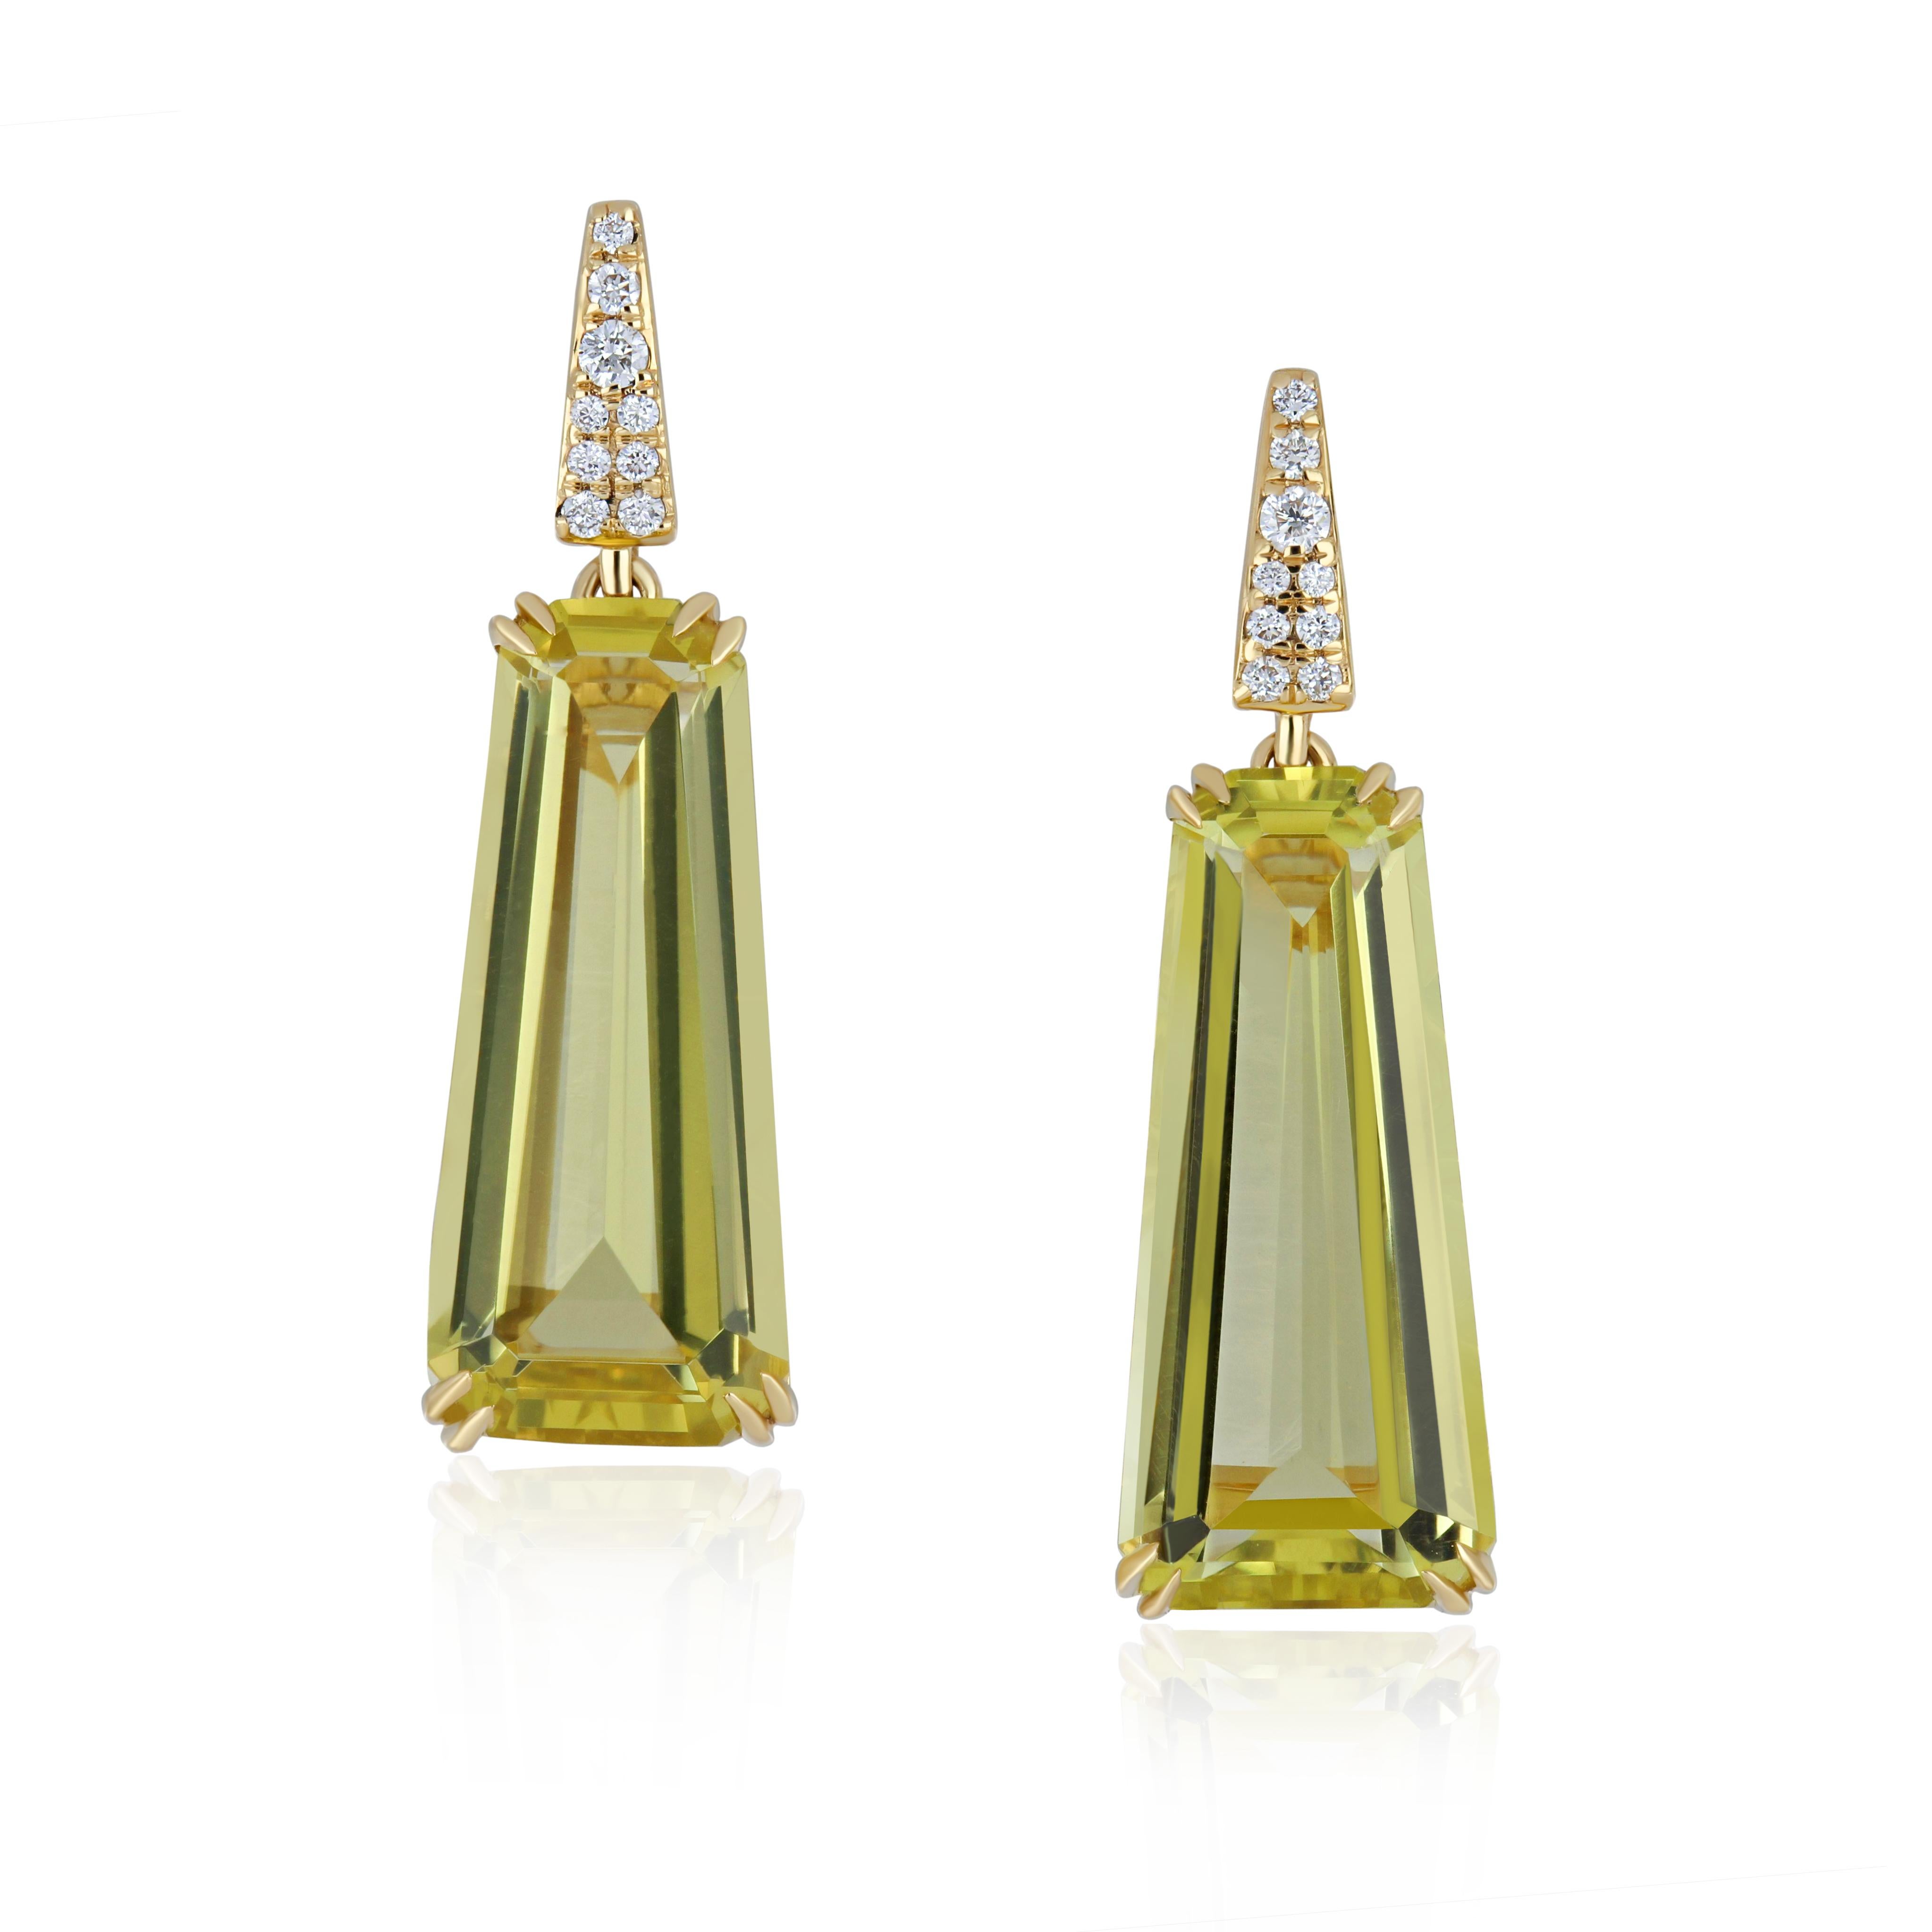 Mixed Cut Exquisite 10.0 cts Lemon Quartz & Diamond Earrings, Handcrafted in 18K Gold For Sale